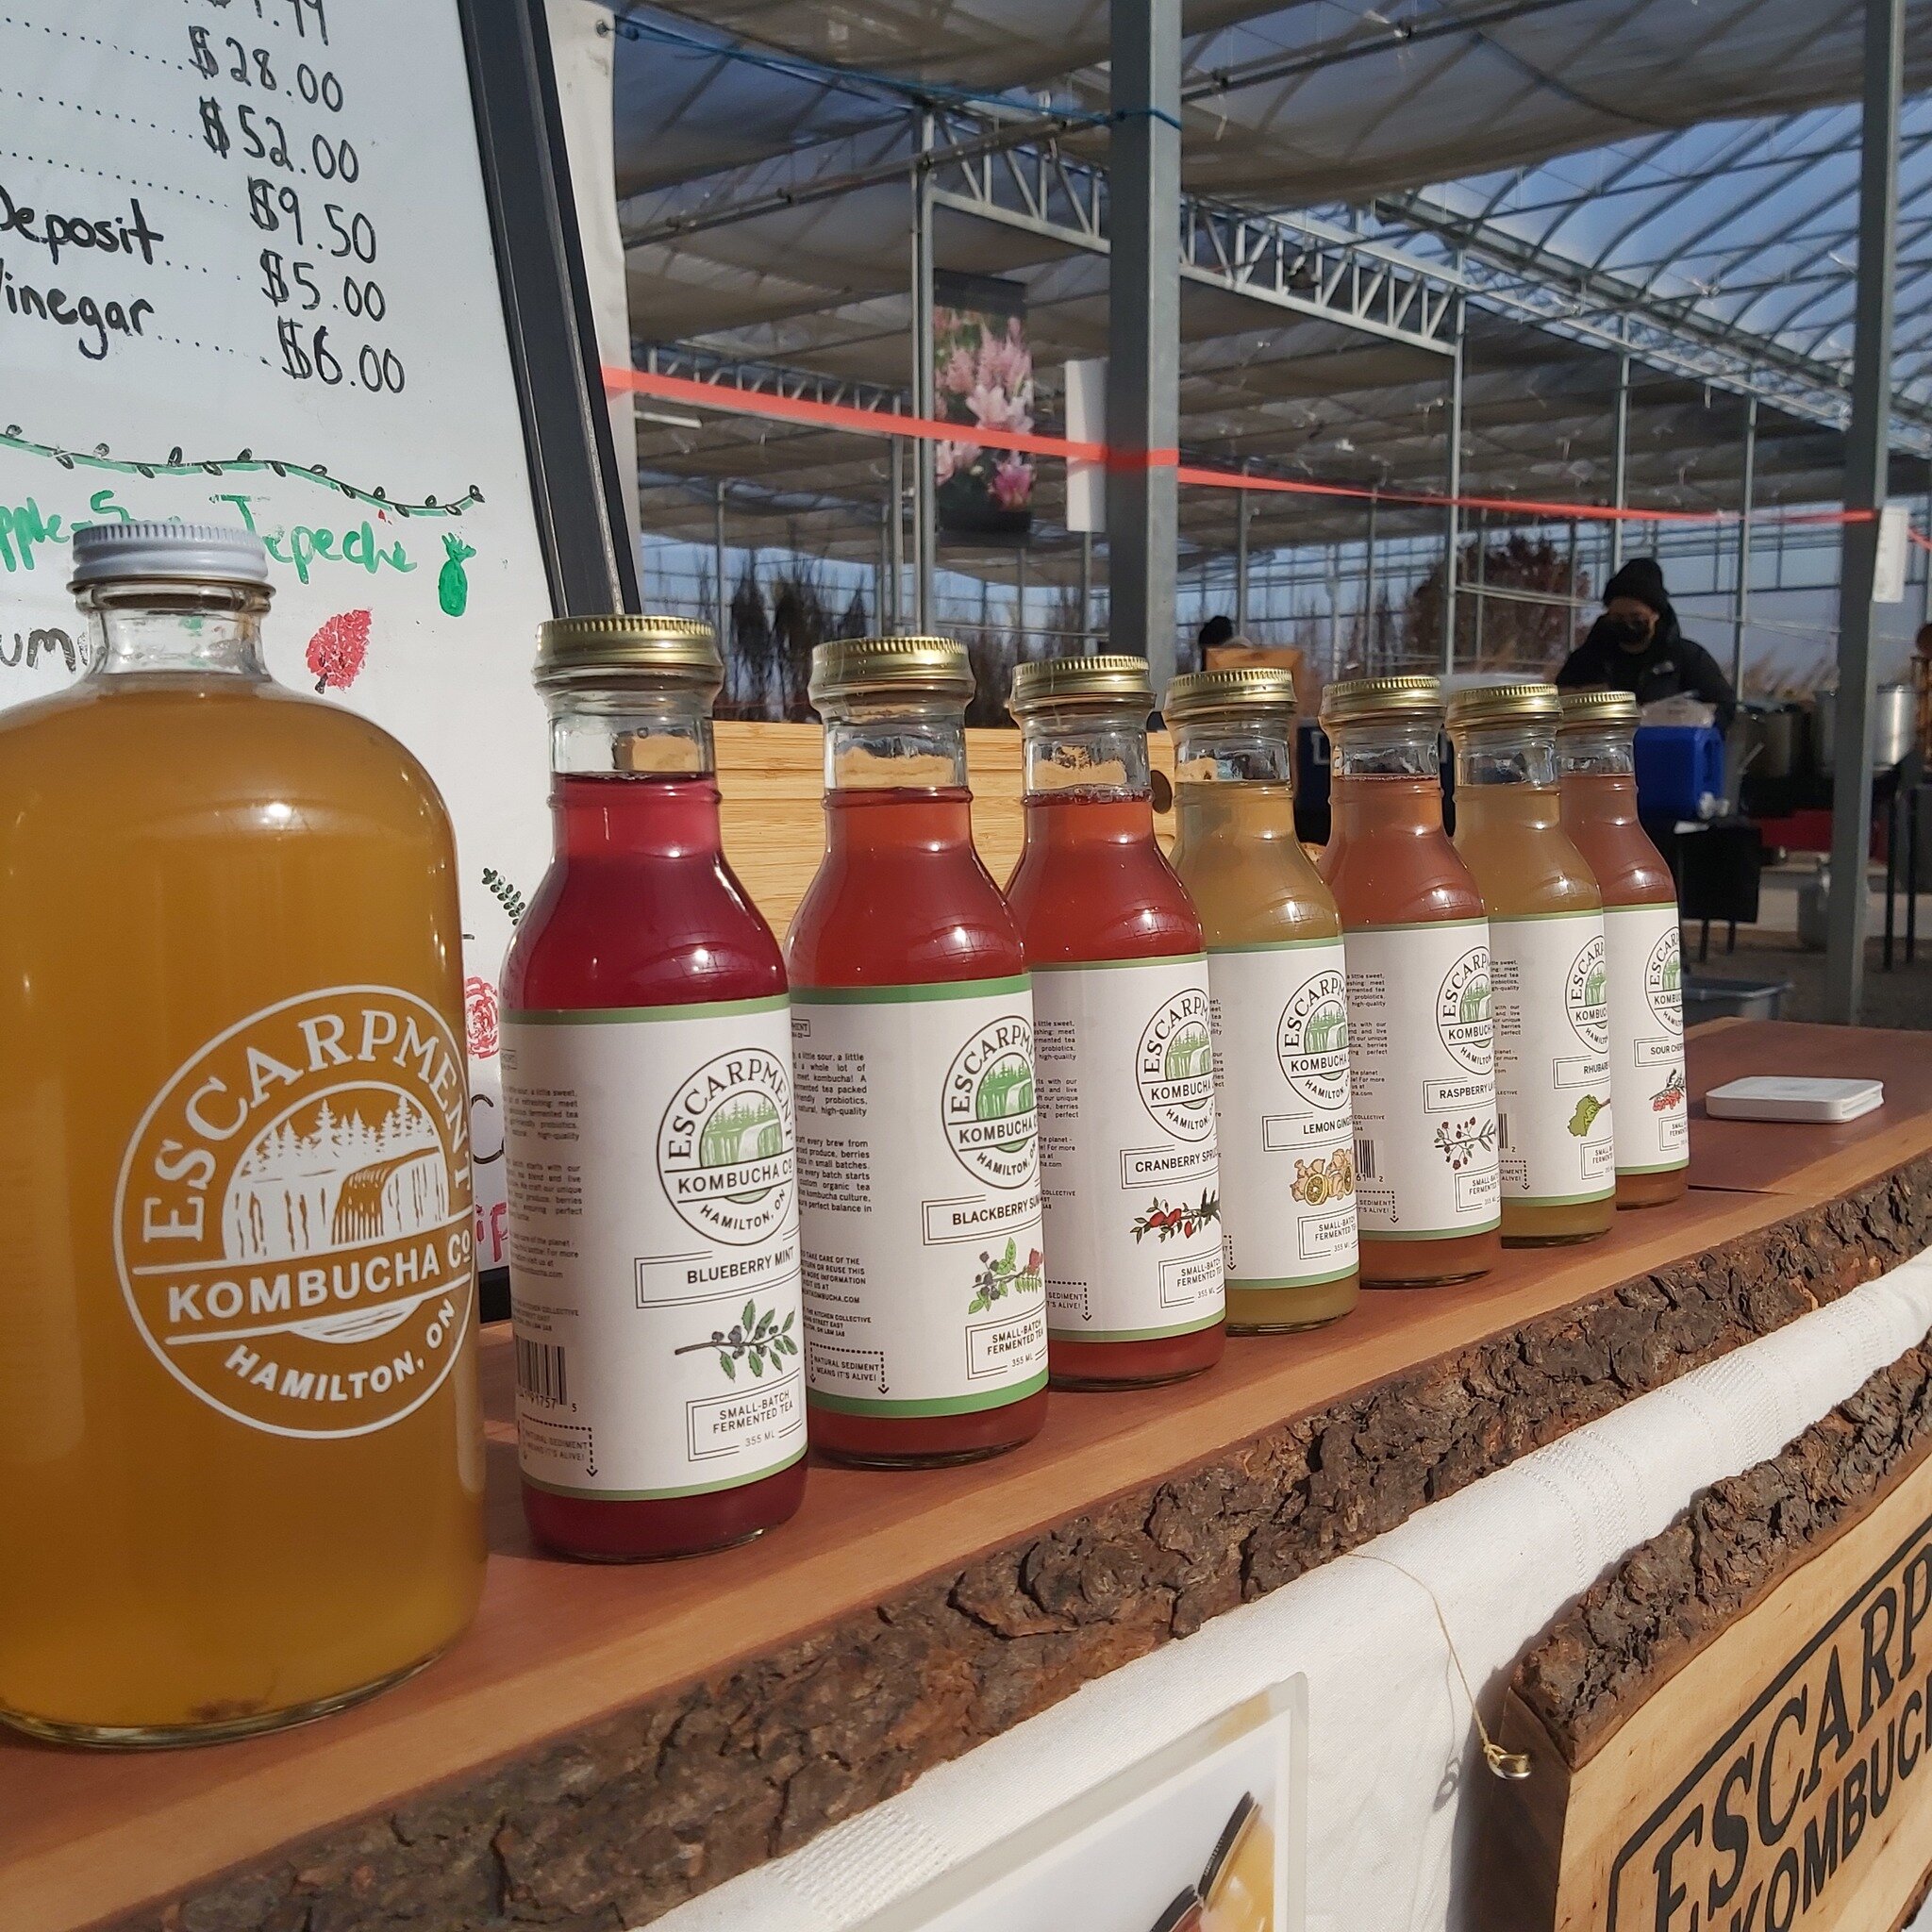 Happy February!🌹It's a good month to check out our market @connonnurseries on Saturdays, or take a trip to the more than a dozen locations that carry our kombucha (listed on our website)! A particular shoutout to Strathcona Market/@mrktbox , whose k